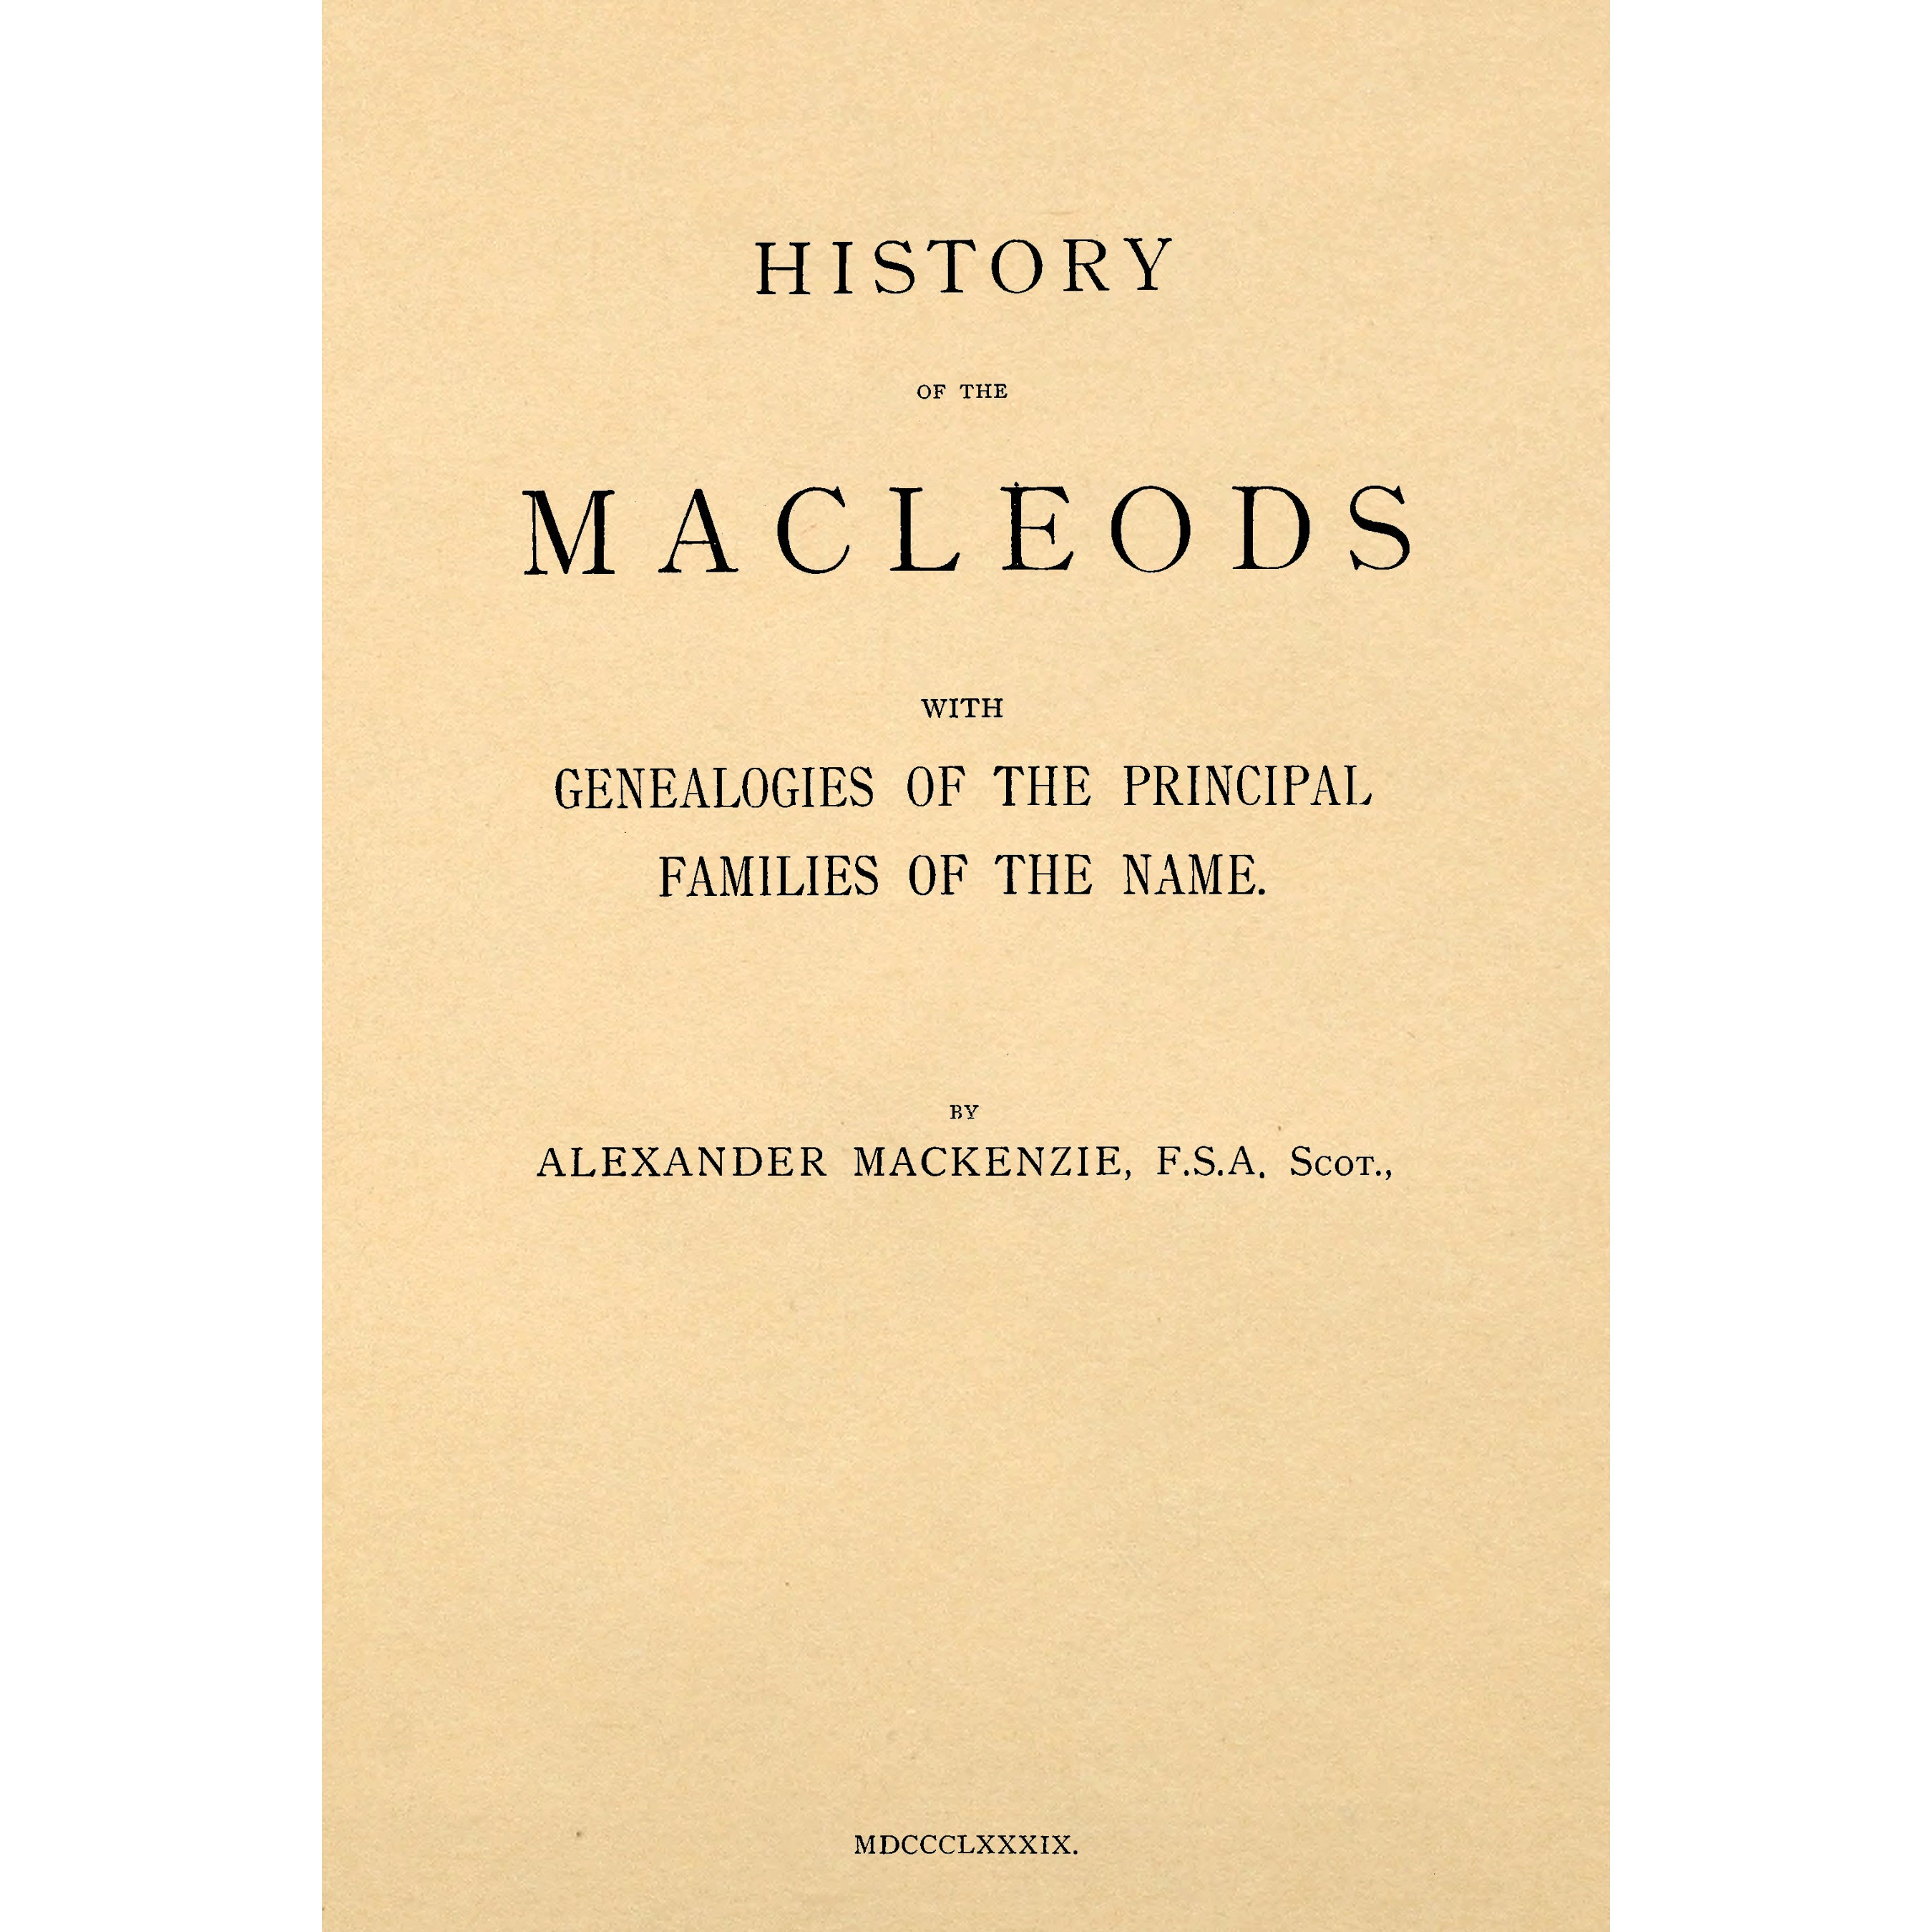 History of the Macleods with genealogies of the principal families of the name